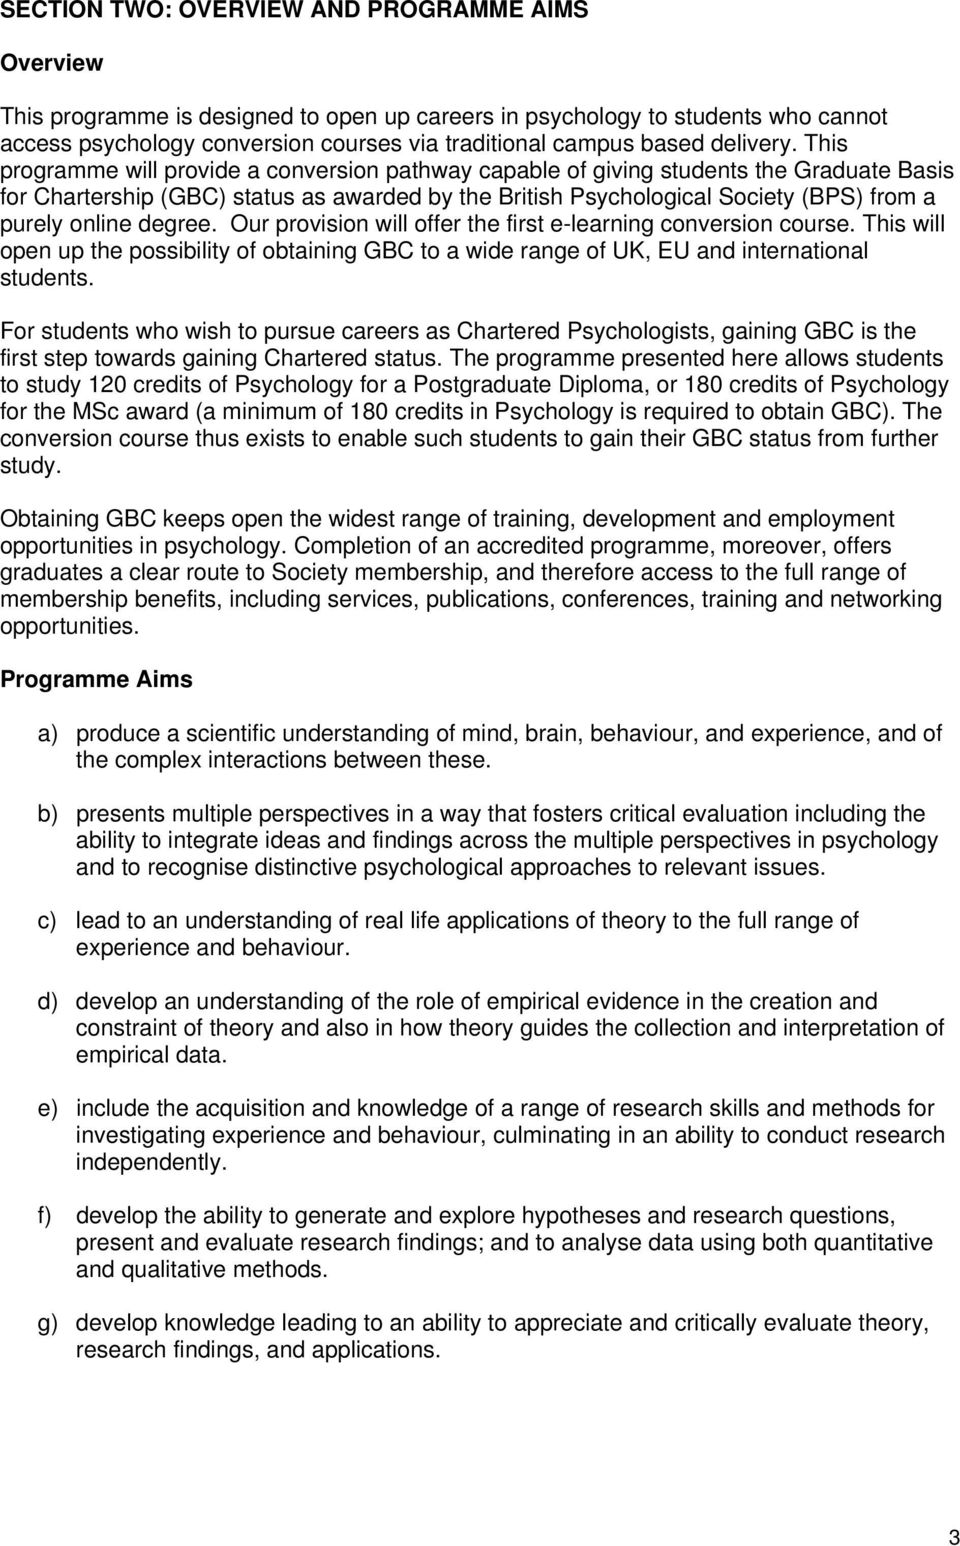 This programme will provide a conversion pathway capable of giving students the Graduate Basis for Chartership (GBC) status as awarded by the British Psychological Society (BPS) from a purely online